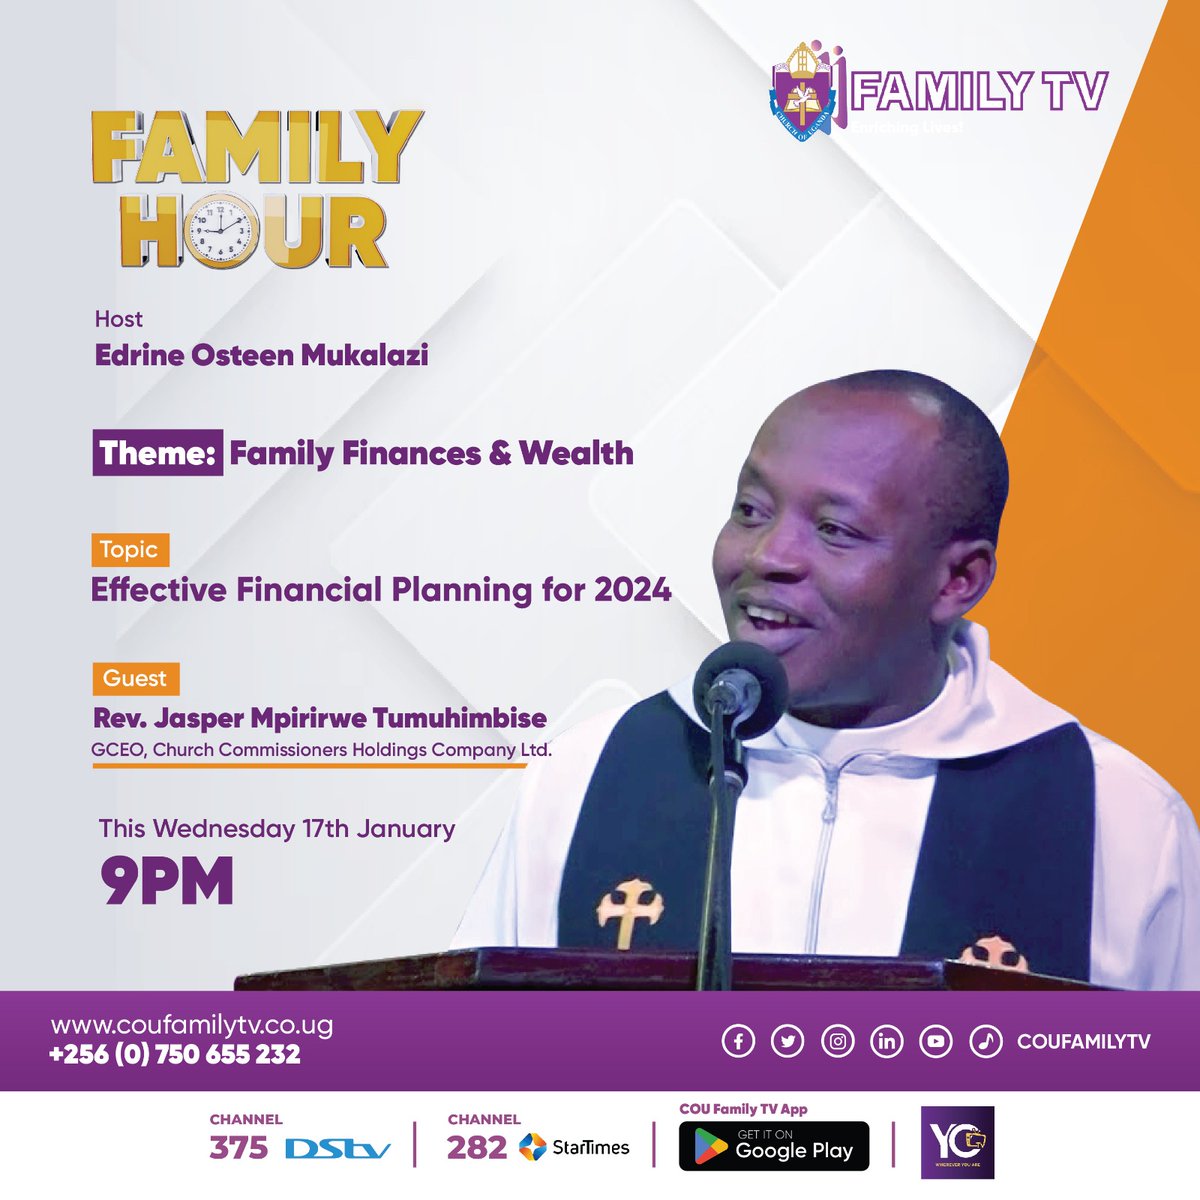 Today Wednesday 17th Feb at 9PM on #FamilyHour, Rev. @jaspermt and @EdrineMukalazi will discuss effective financial planning for 2024. Tune in and listen for in-depth discussions about financial resiliency and the potential of smart planning. #familyhour #enrichinglives #finance